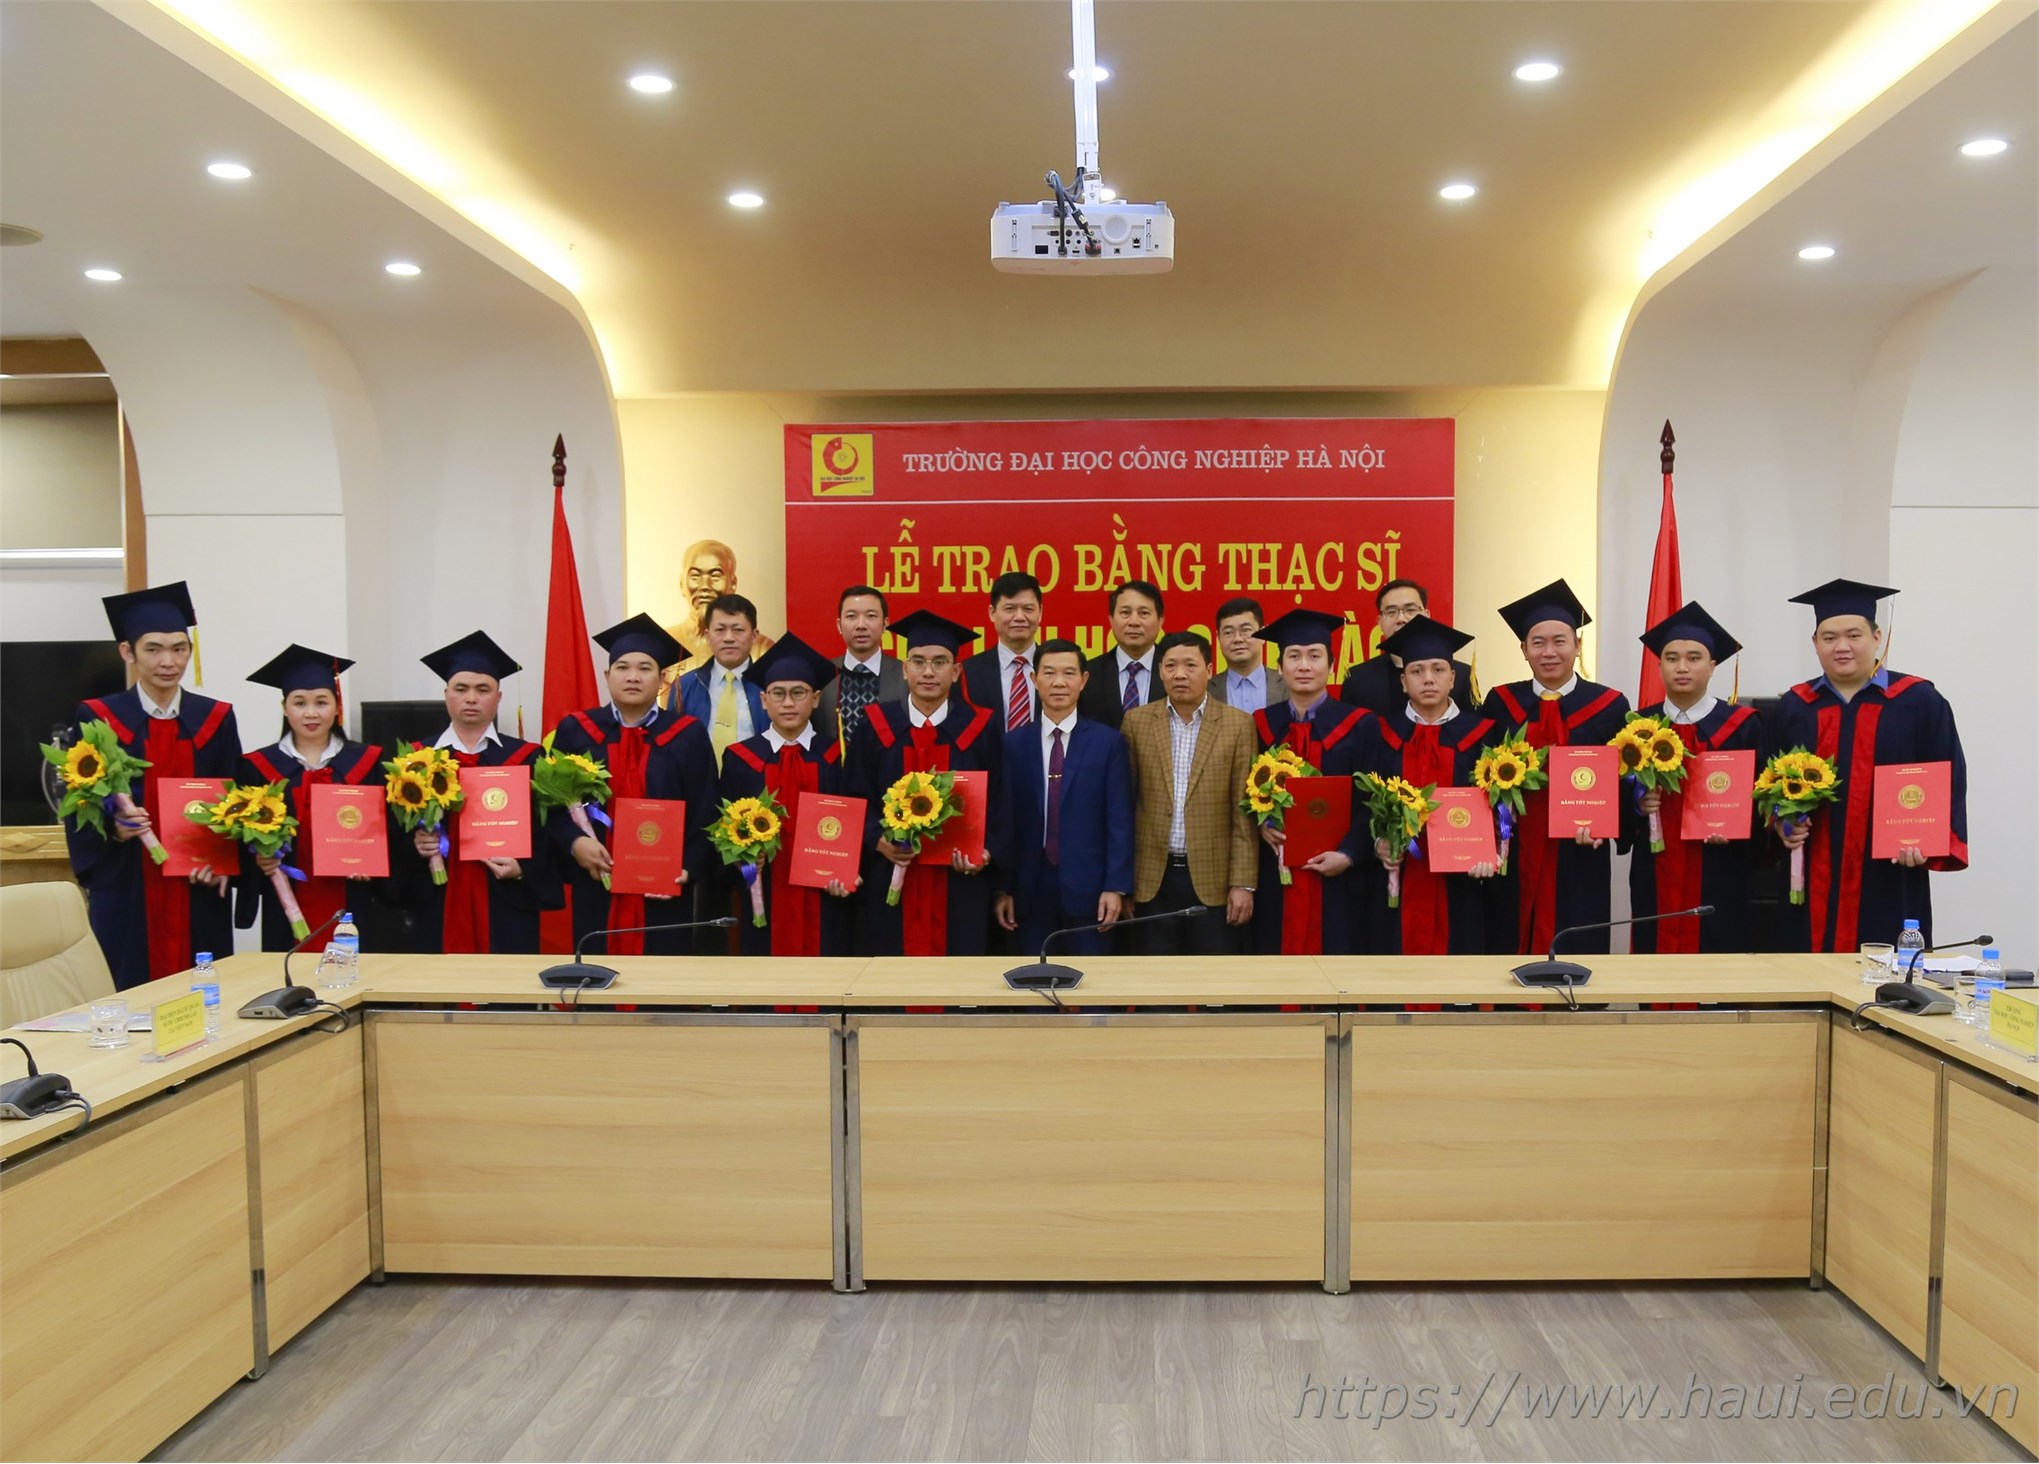 Graduation Ceremony and Award of Master's Degree for 12 Lao students